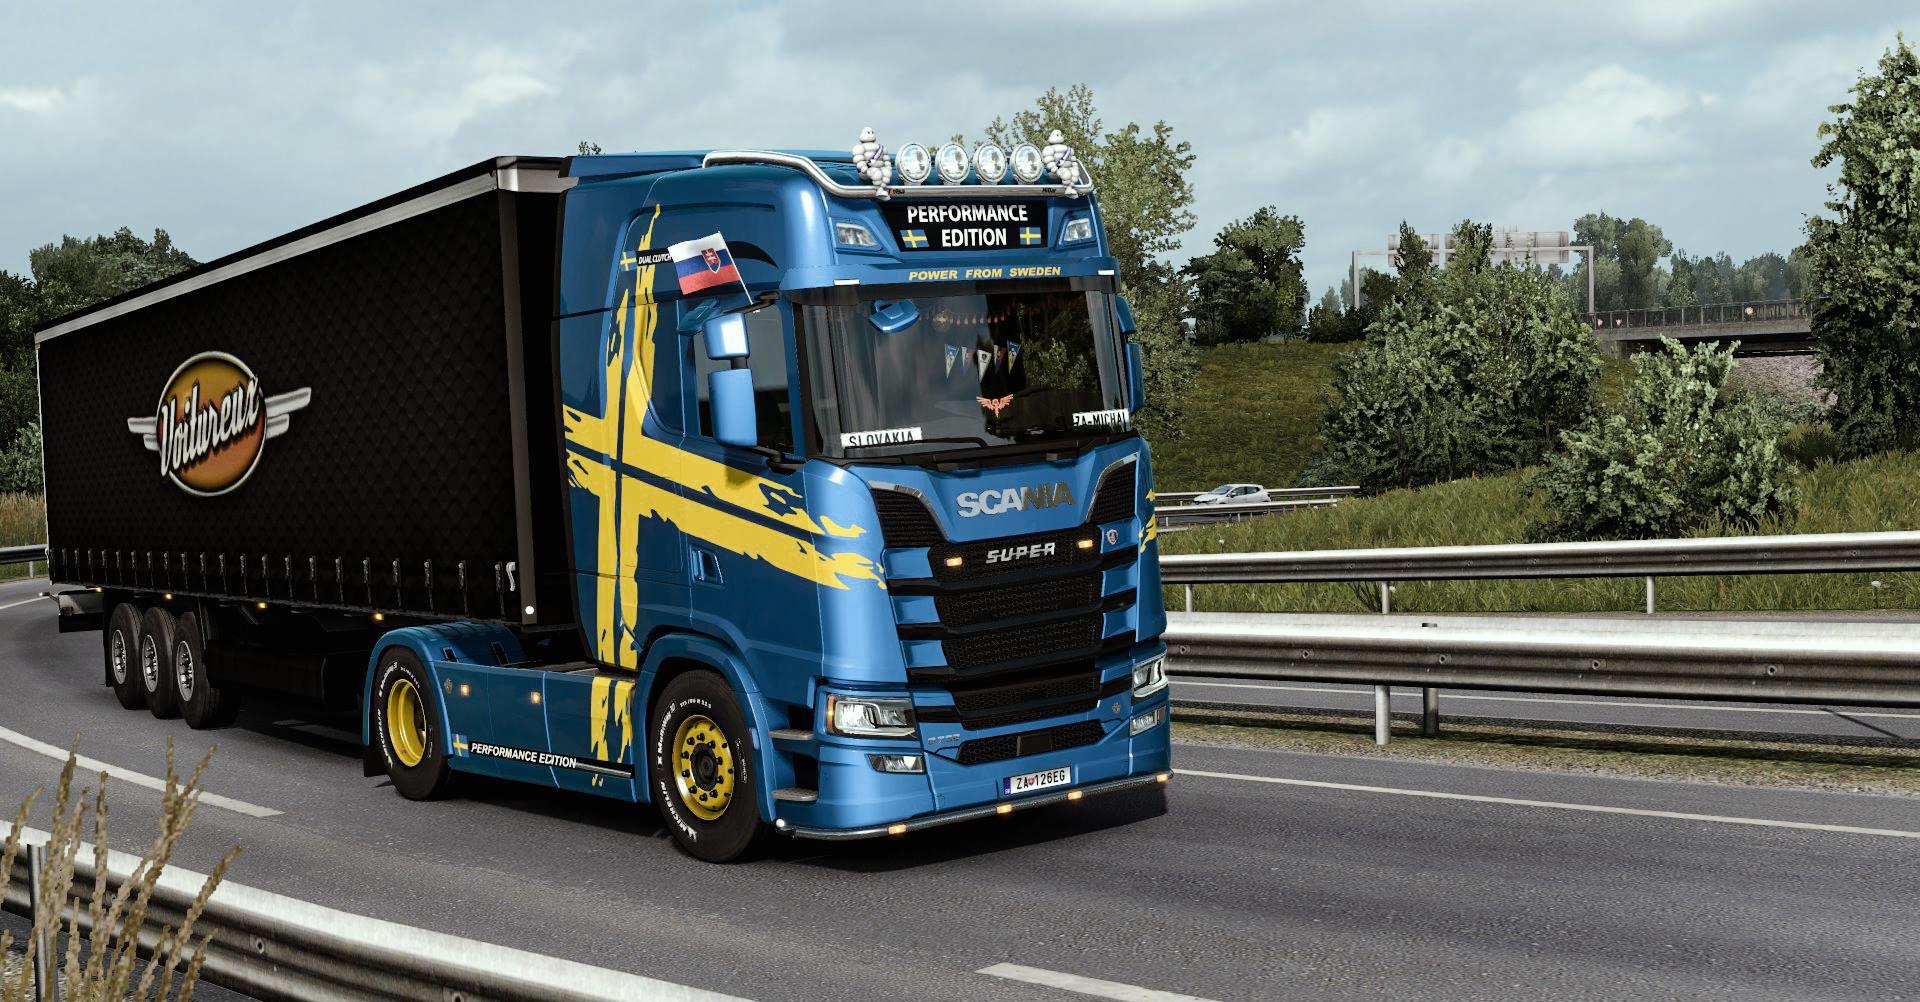 ETS2 - Scania S Performance Edition 2016 Skin (1.36.x) | Euro Truck